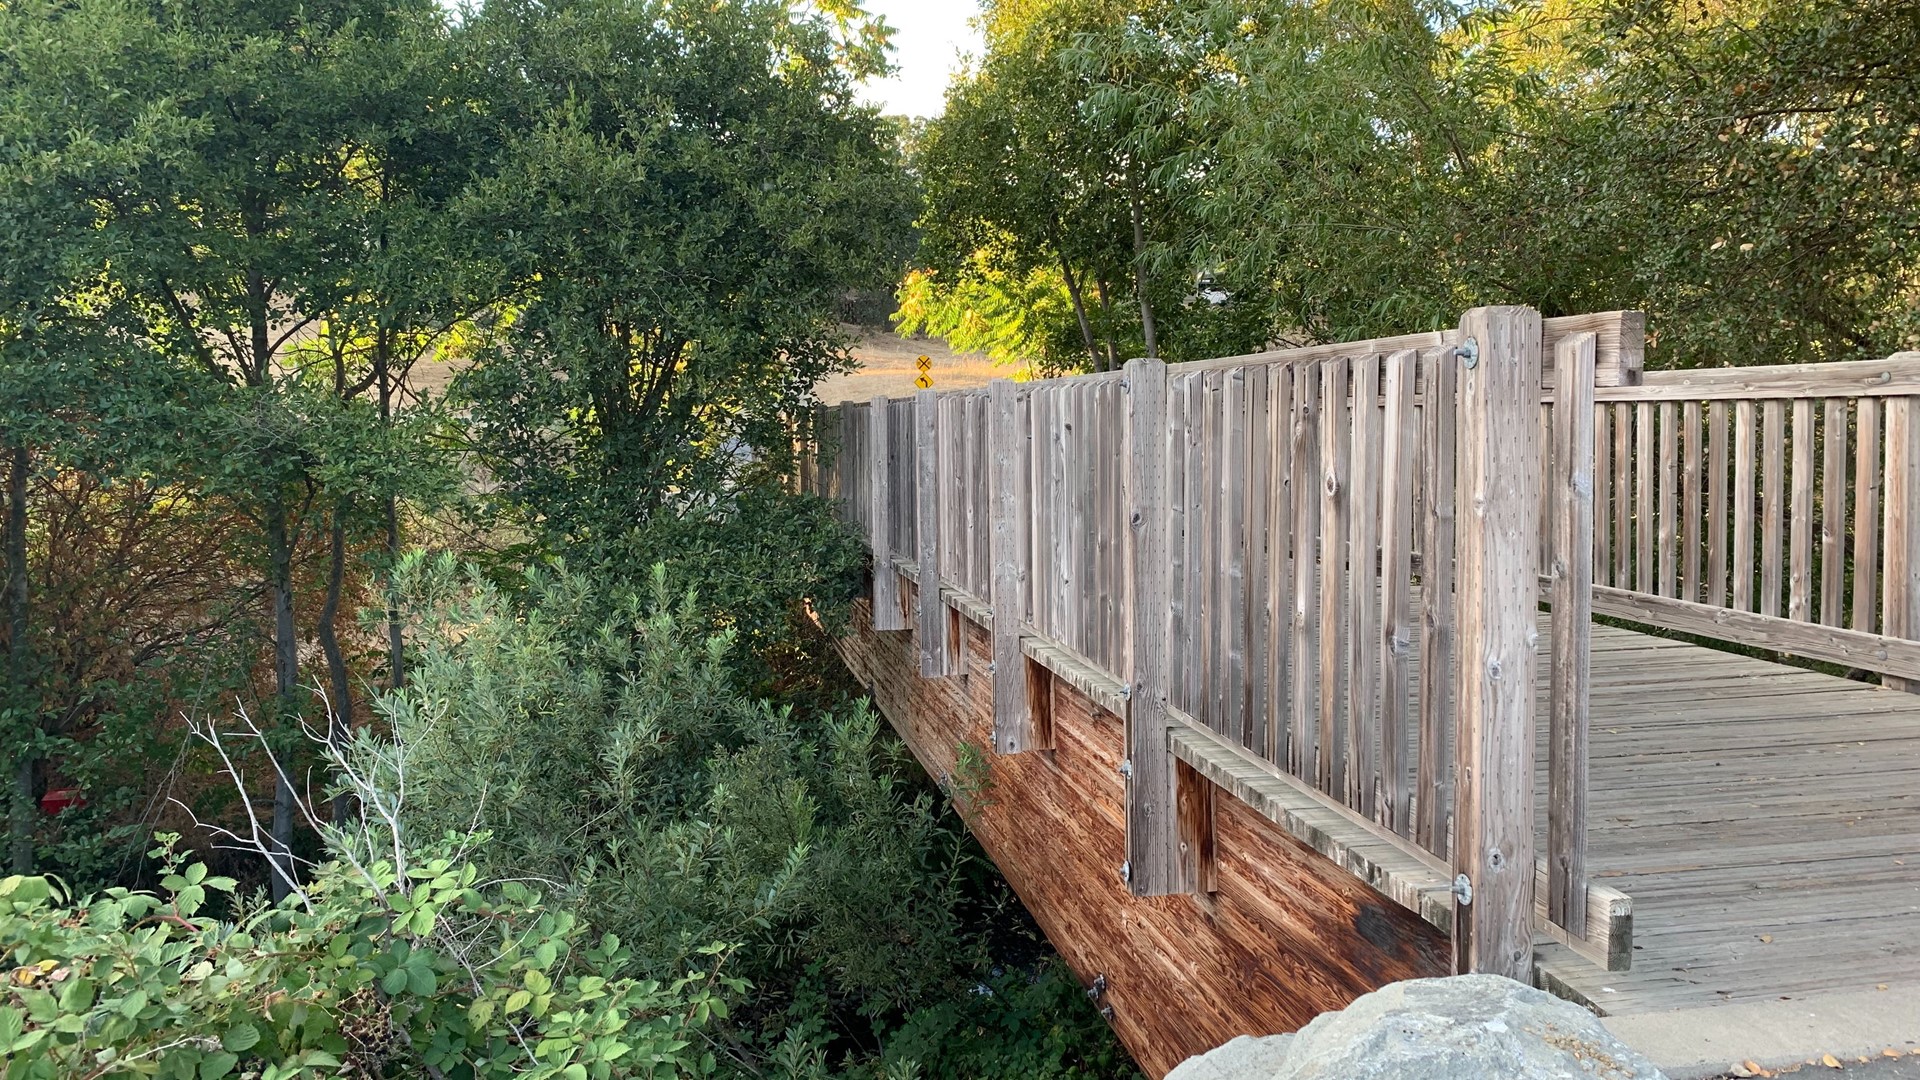 Folsom police are on the lookout for a man who they say sexually assaulted a teen girl on a bike trail, Friday night. According to police, the 15-year-old girl was grabbed by a man as she was walking along a bike trail in the 1200 block of Creekside Drive around 11 p.m.